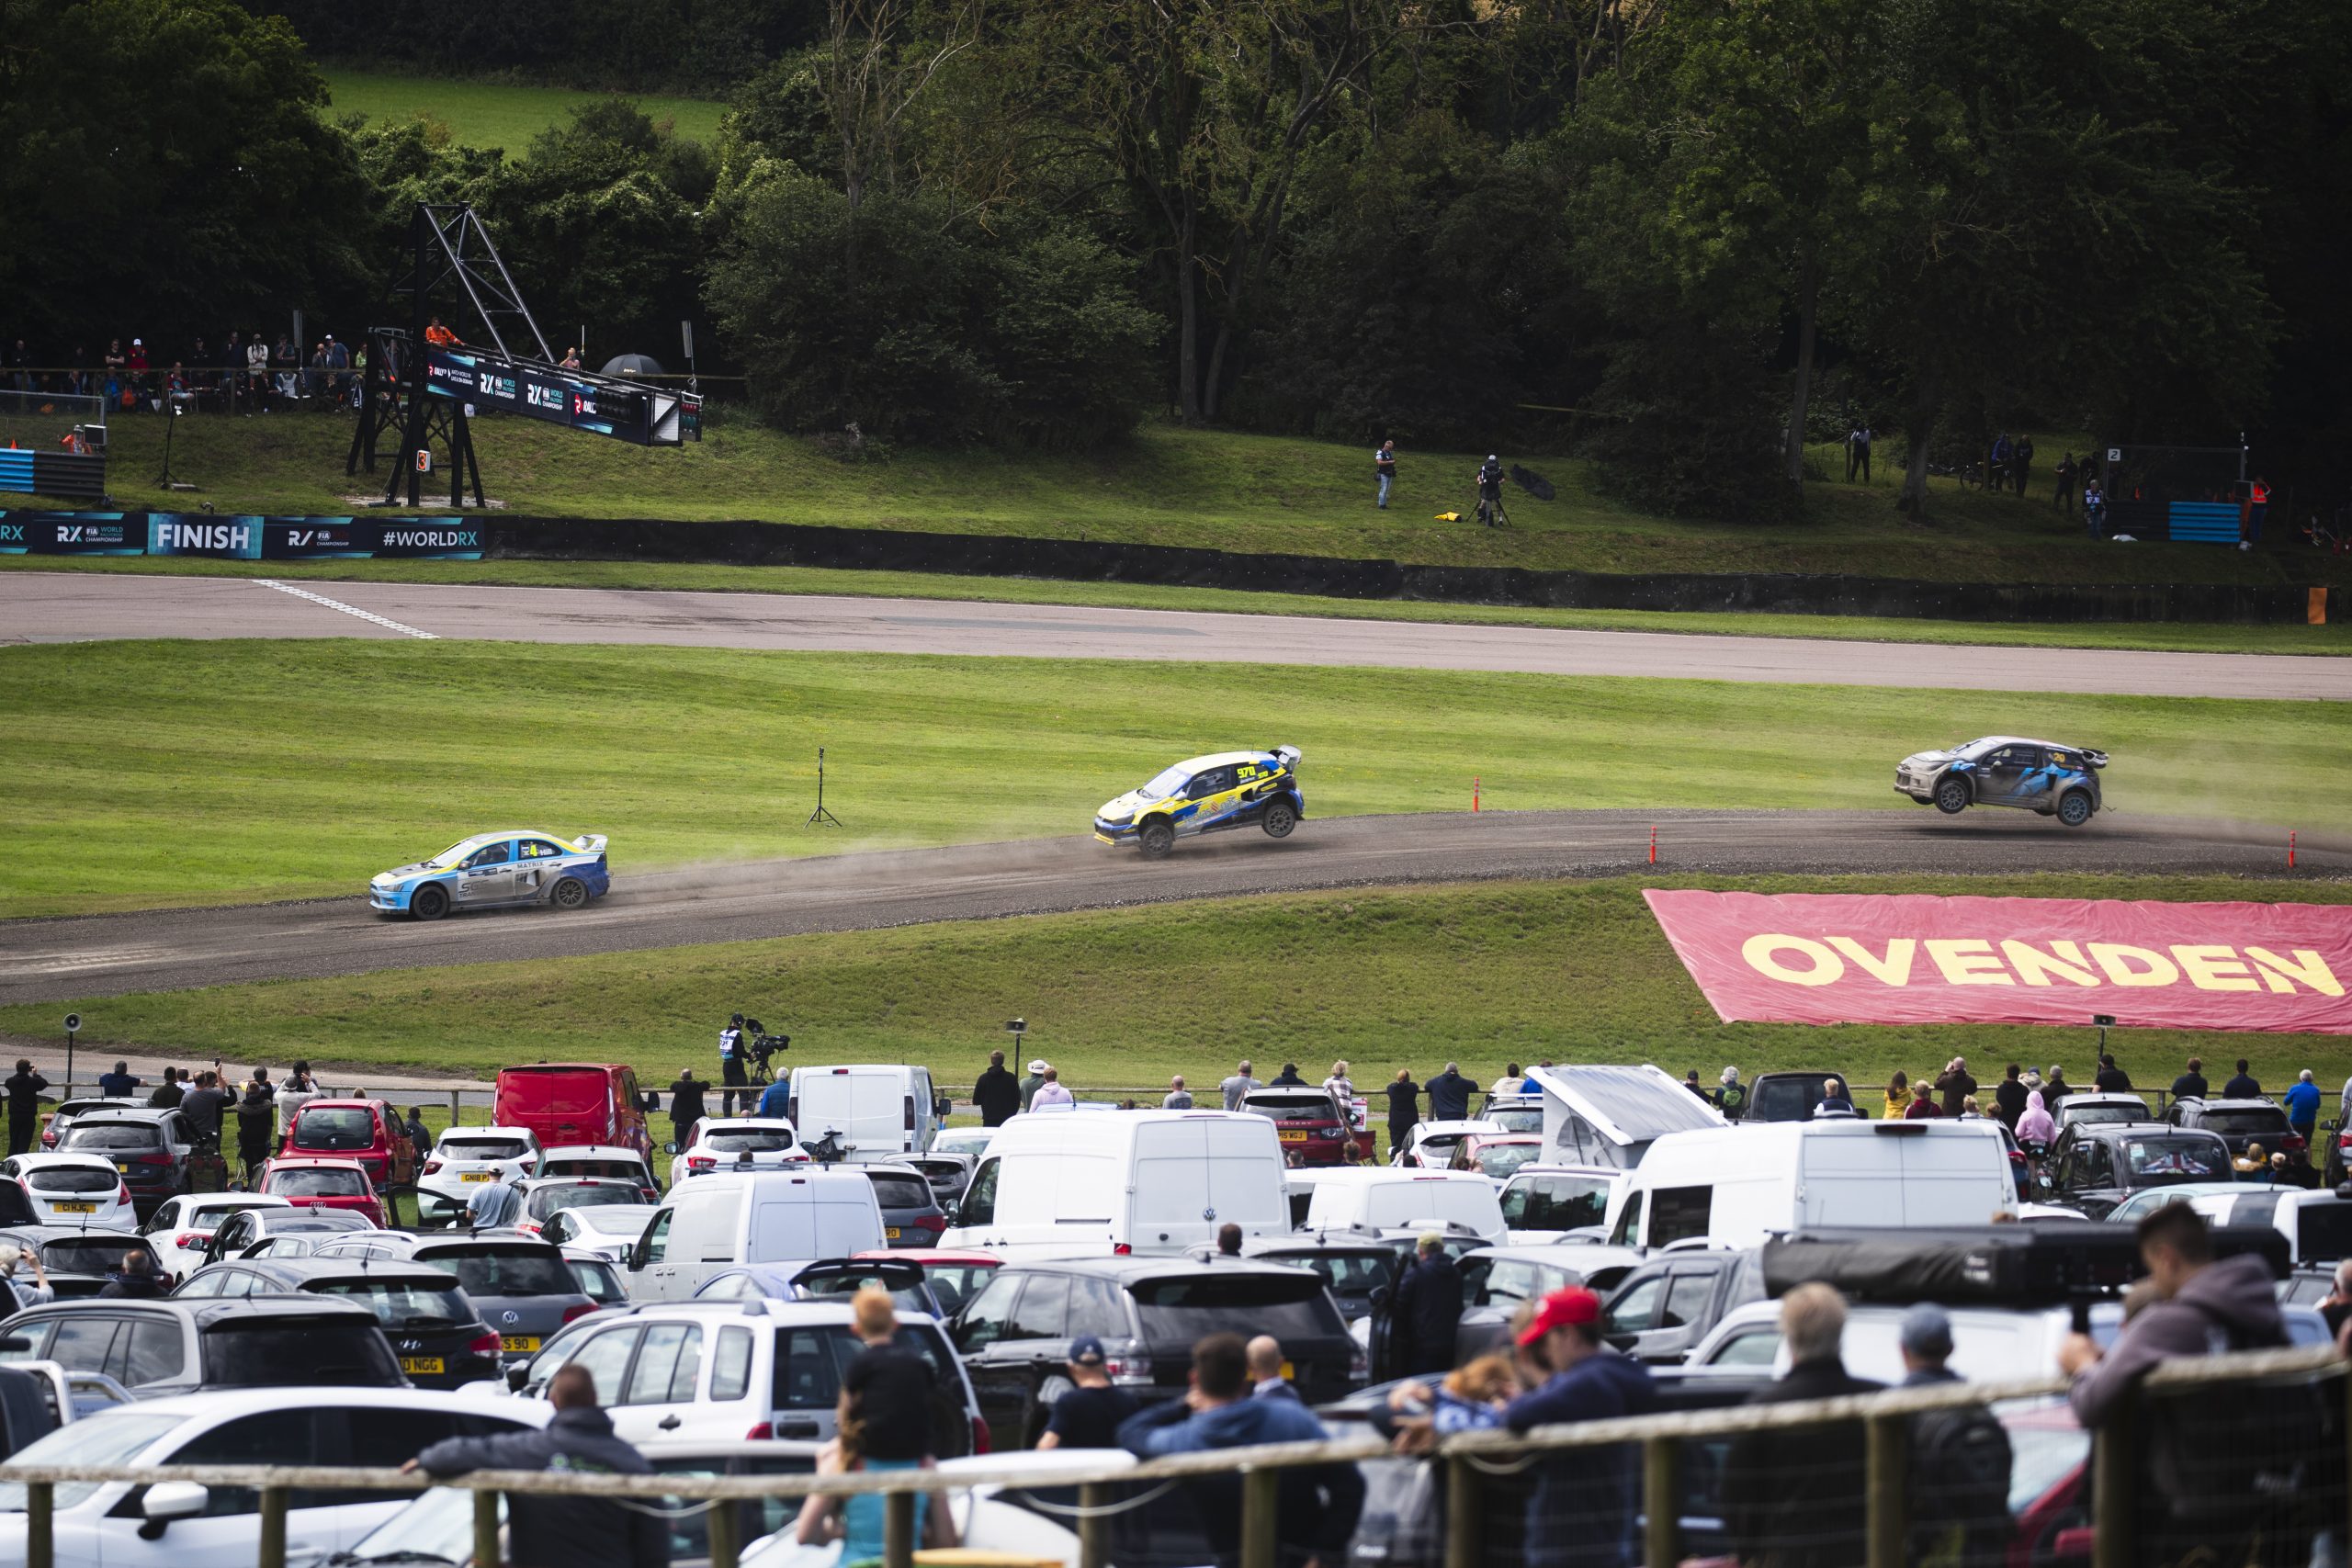 Lydden Hill Race Circuit in Kent - The Home Of Rallycross